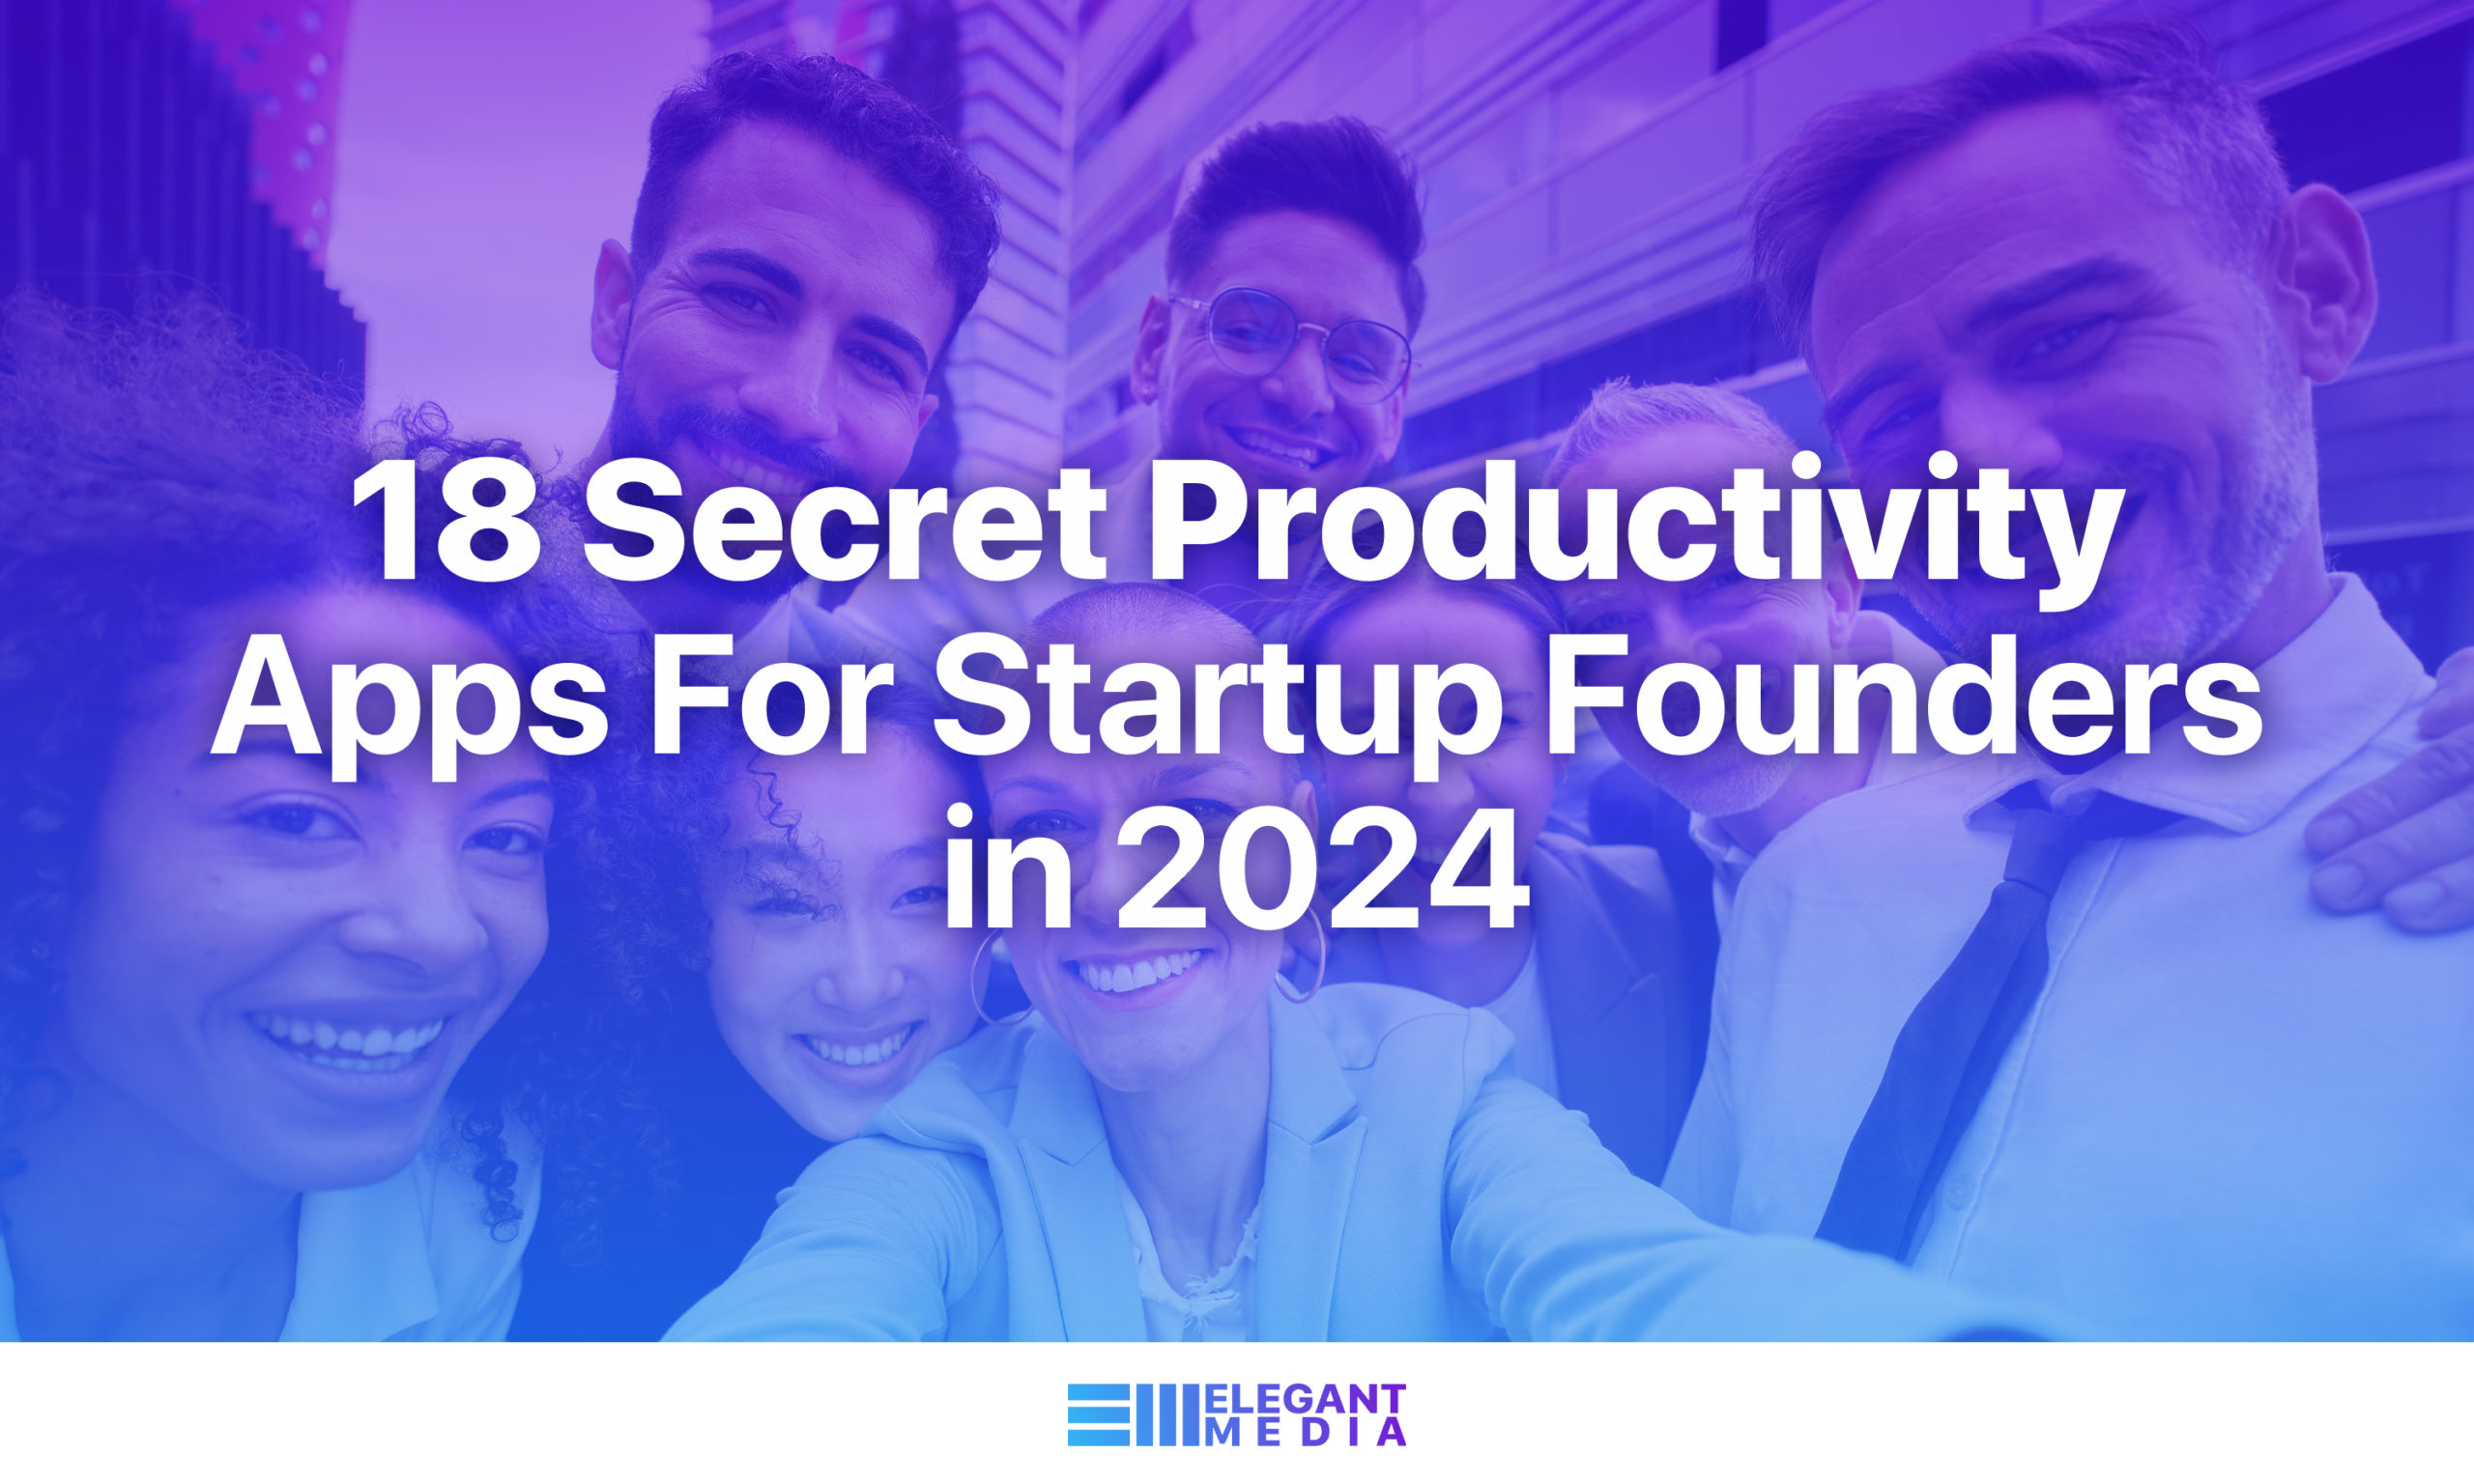 18 Secret Productivity Apps For Startup Founders in 2024